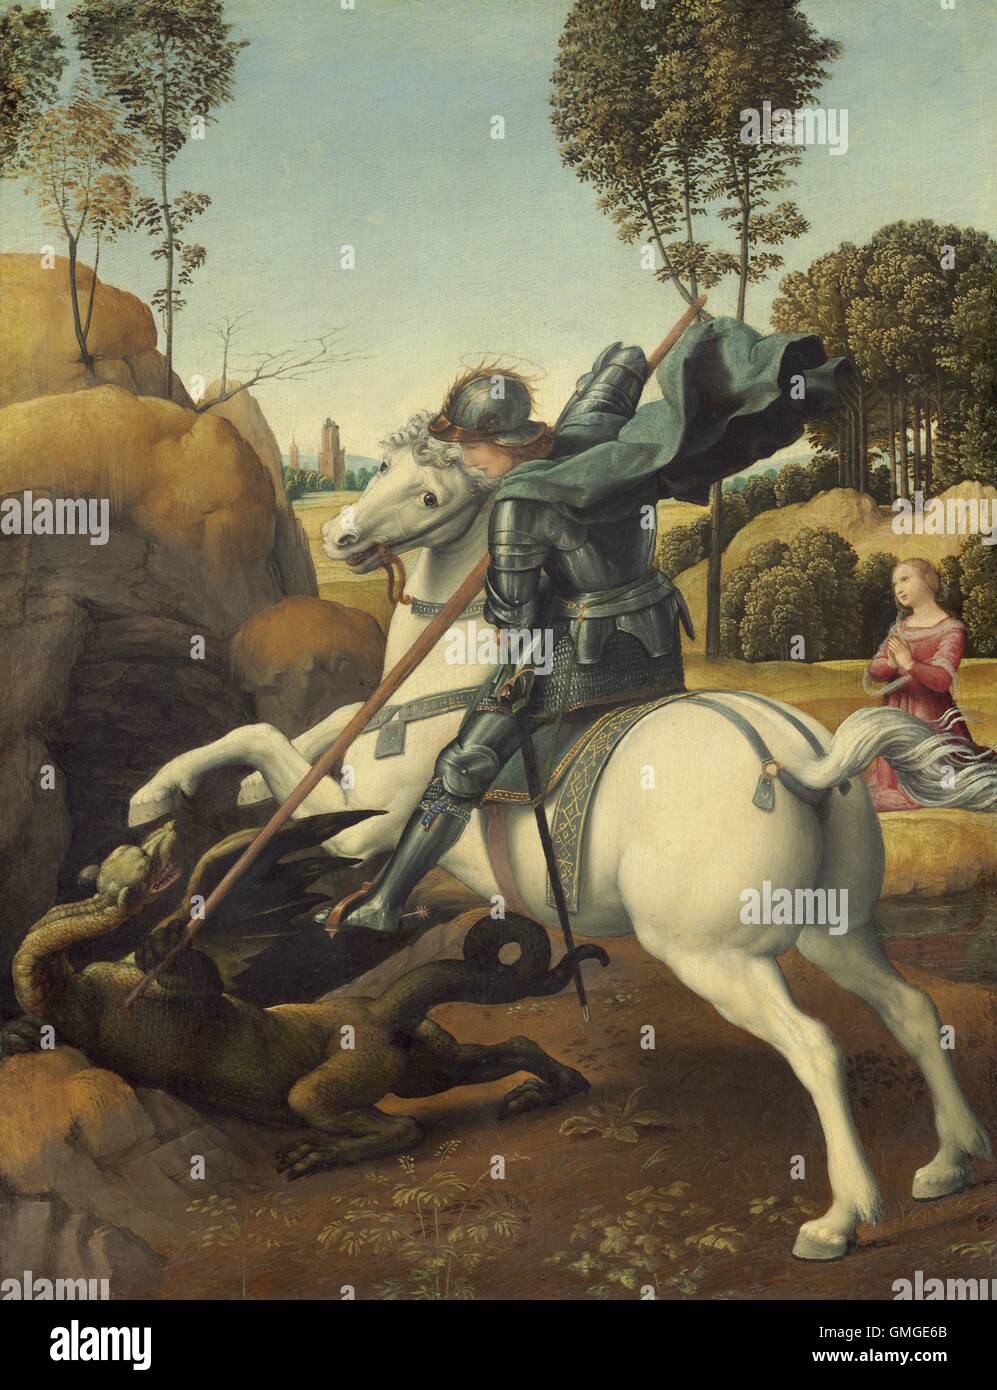 Saint George and the Dragon, by Raphael, c. 1506, Italian Renaissance painting, oil on panel. George was patron saint of England. Raphael was commissioned to create this as a gift for the envoy of the Tudor King Henry VII (BSLOC 2016 5 4) Stock Photo